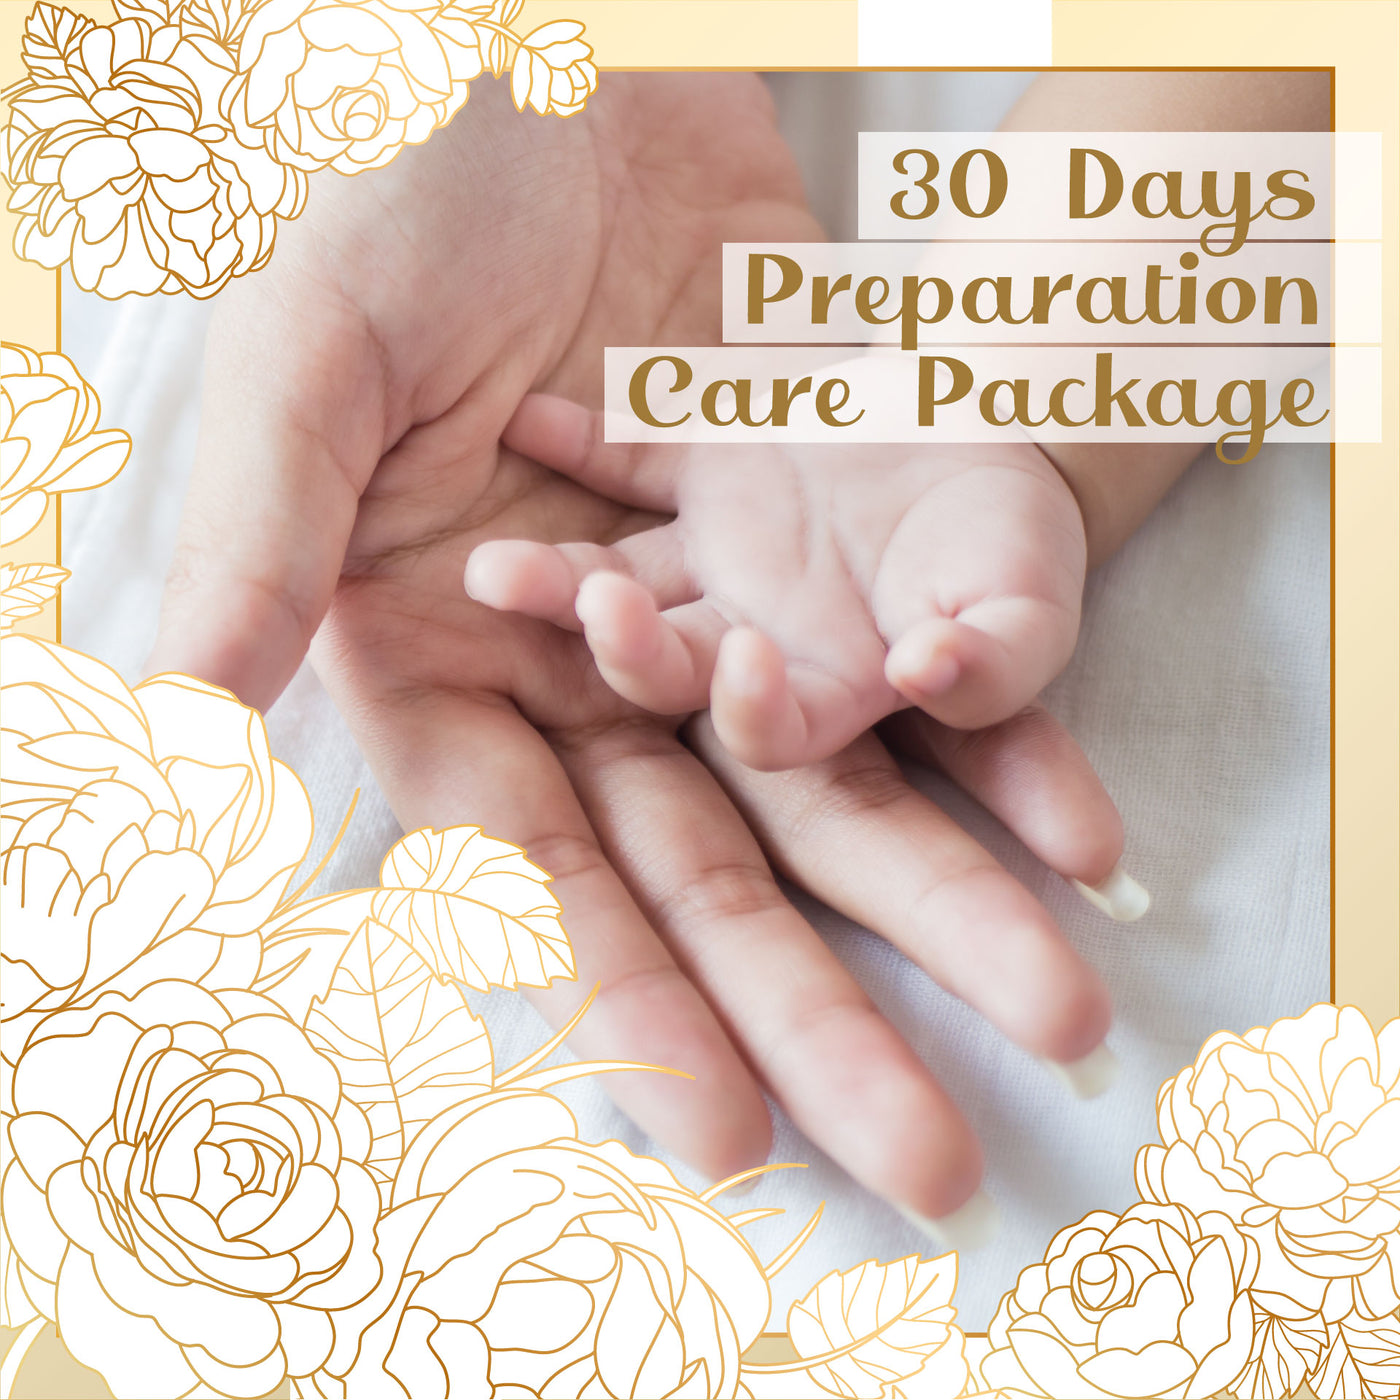 30 Days Preparation Care Package (8 Boxes of Organic Drip Chicken Essence)